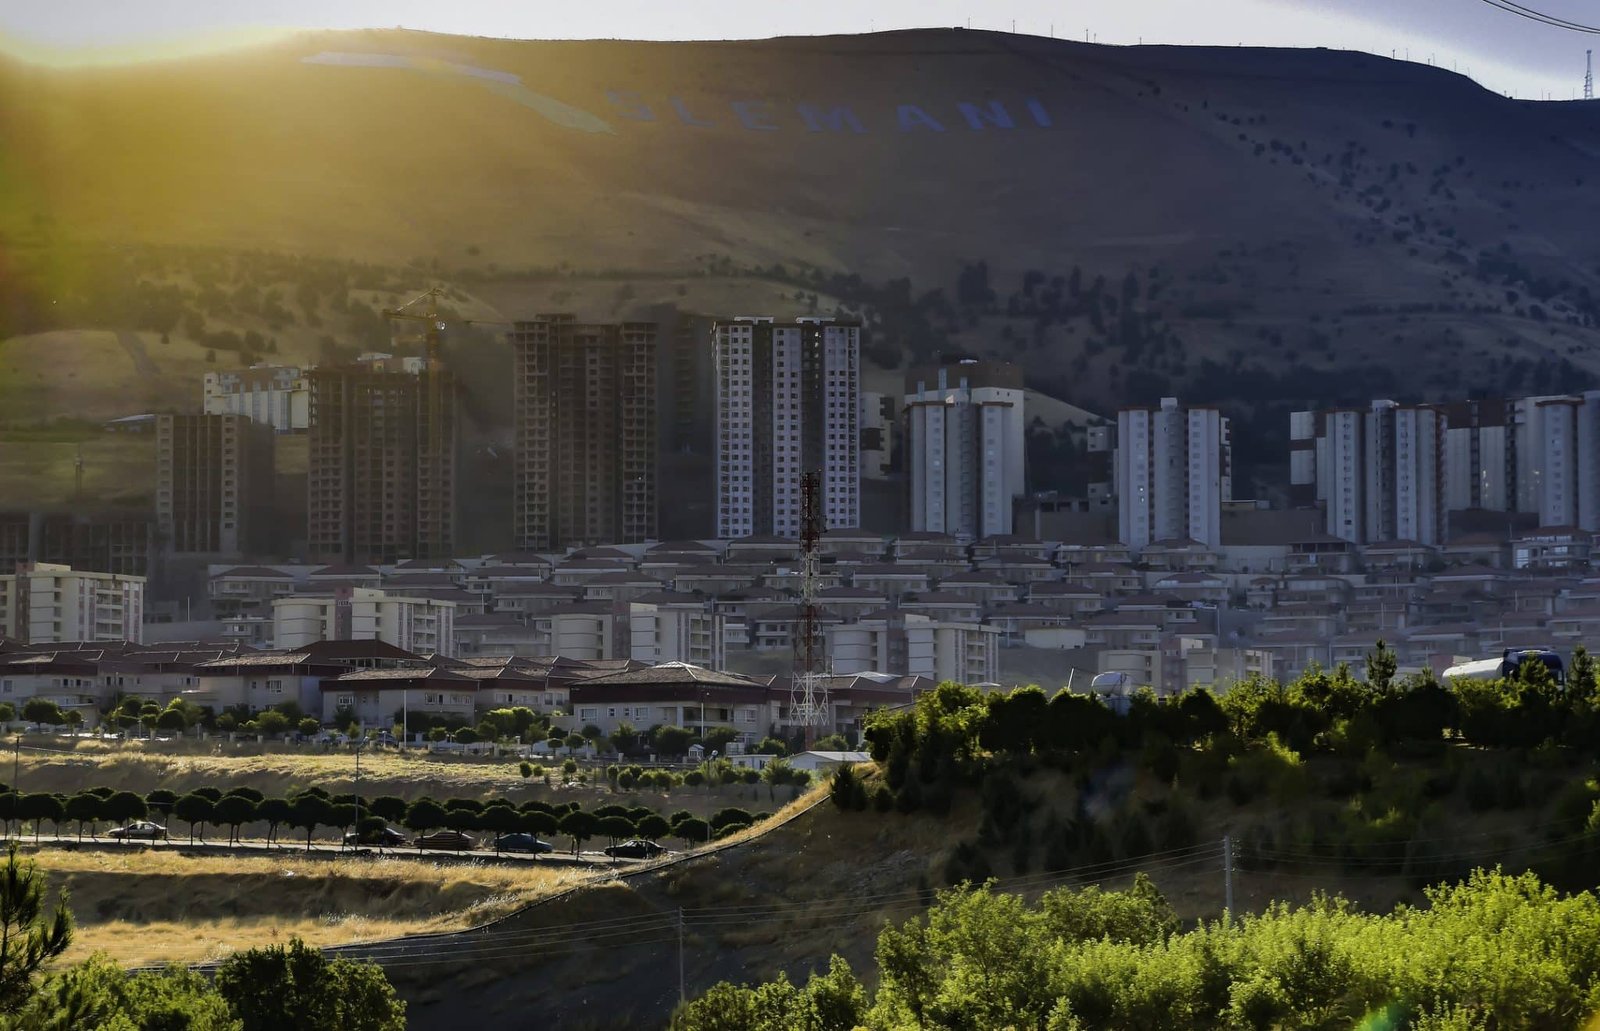 Sulaymaniyah from the outskirts